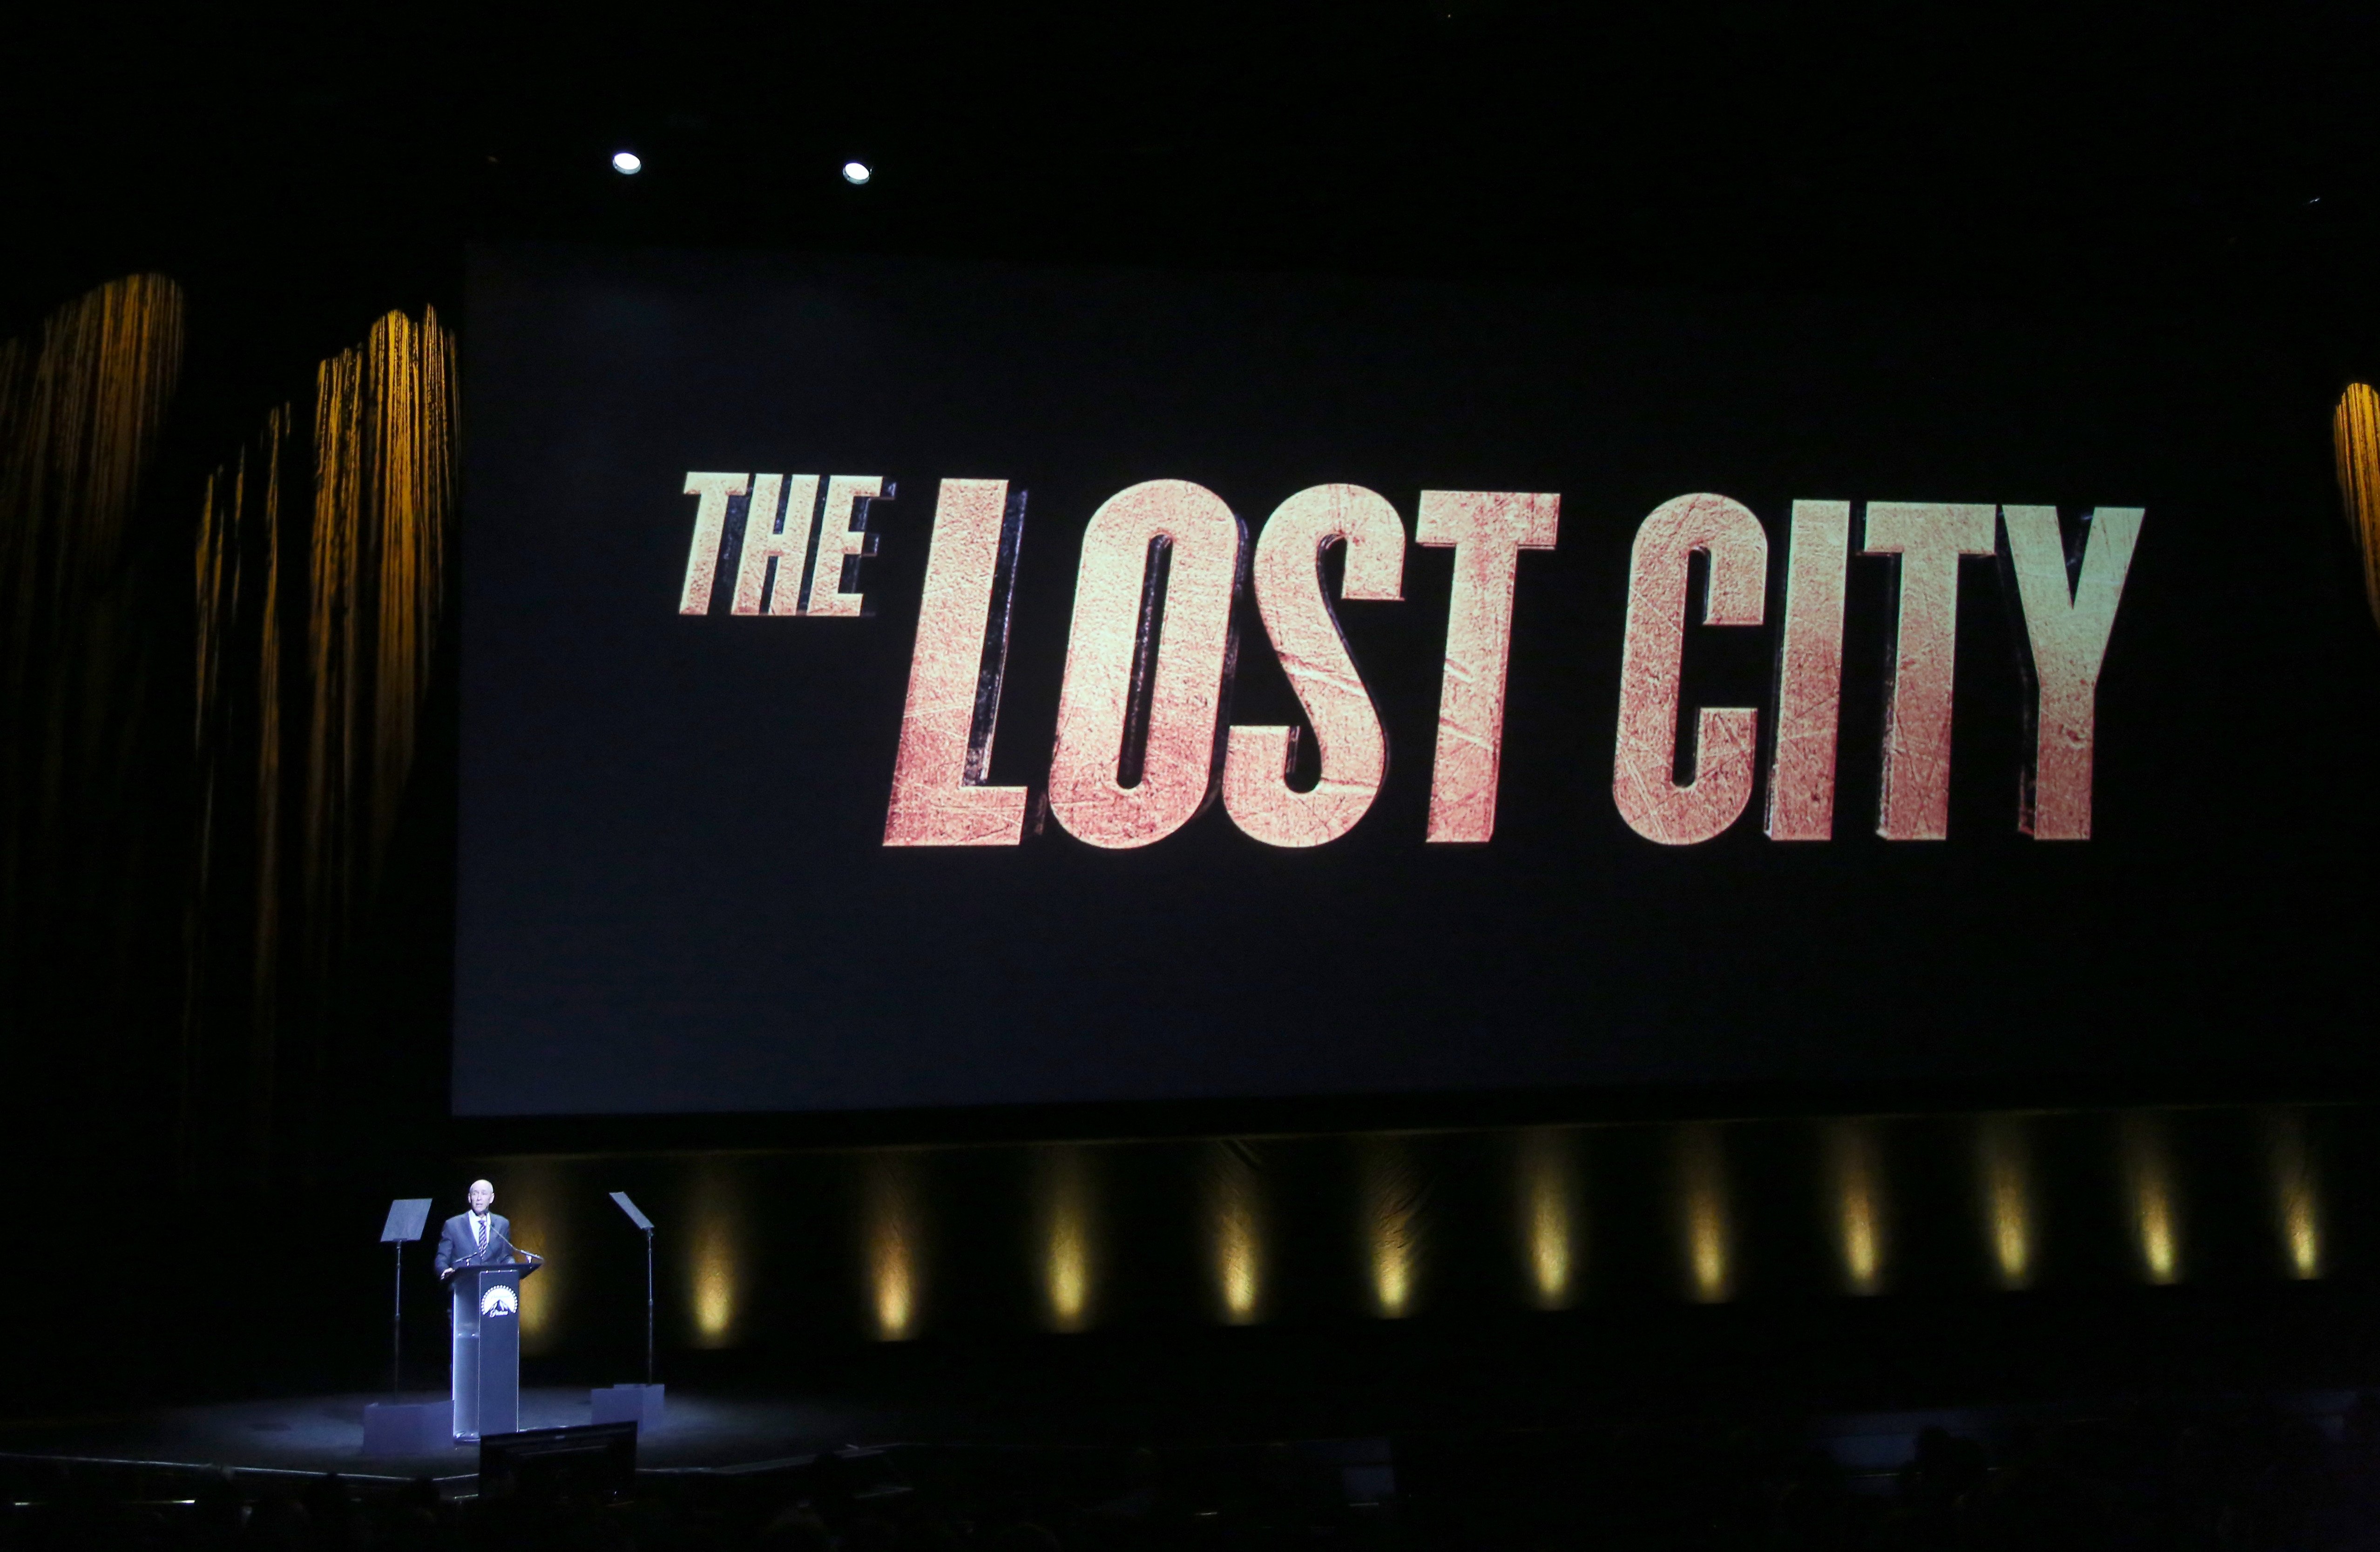 Paramount Pictures President of Domestic Distribution Chris Aronson speaks about the "The Lost City" movie during Paramount Pictures Studios presentation at Caesars Palace, on April 28, 2022, in Las Vegas, Nevada. | Source: Getty Images